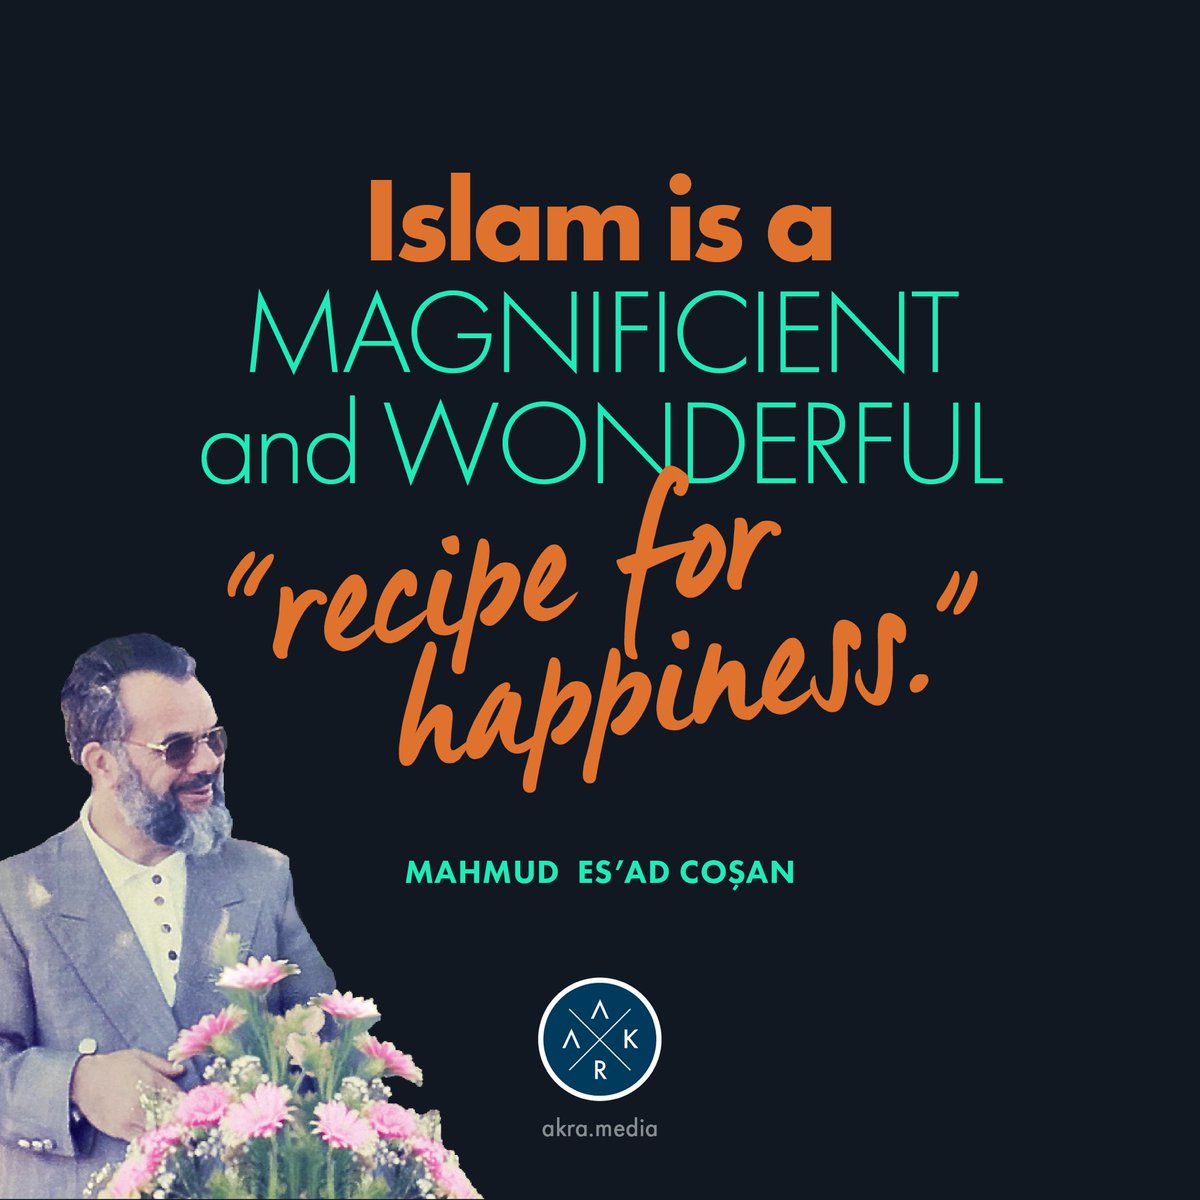 Islam is a MAGNIFICENT and WONDERFUL ‘recipe for happiness.’
 
MAHMUD ES’AD COŞAN

#islam #religionislam #faith #findingfaith #innerpeace #recipeforhappiness #happiness #realhappiness